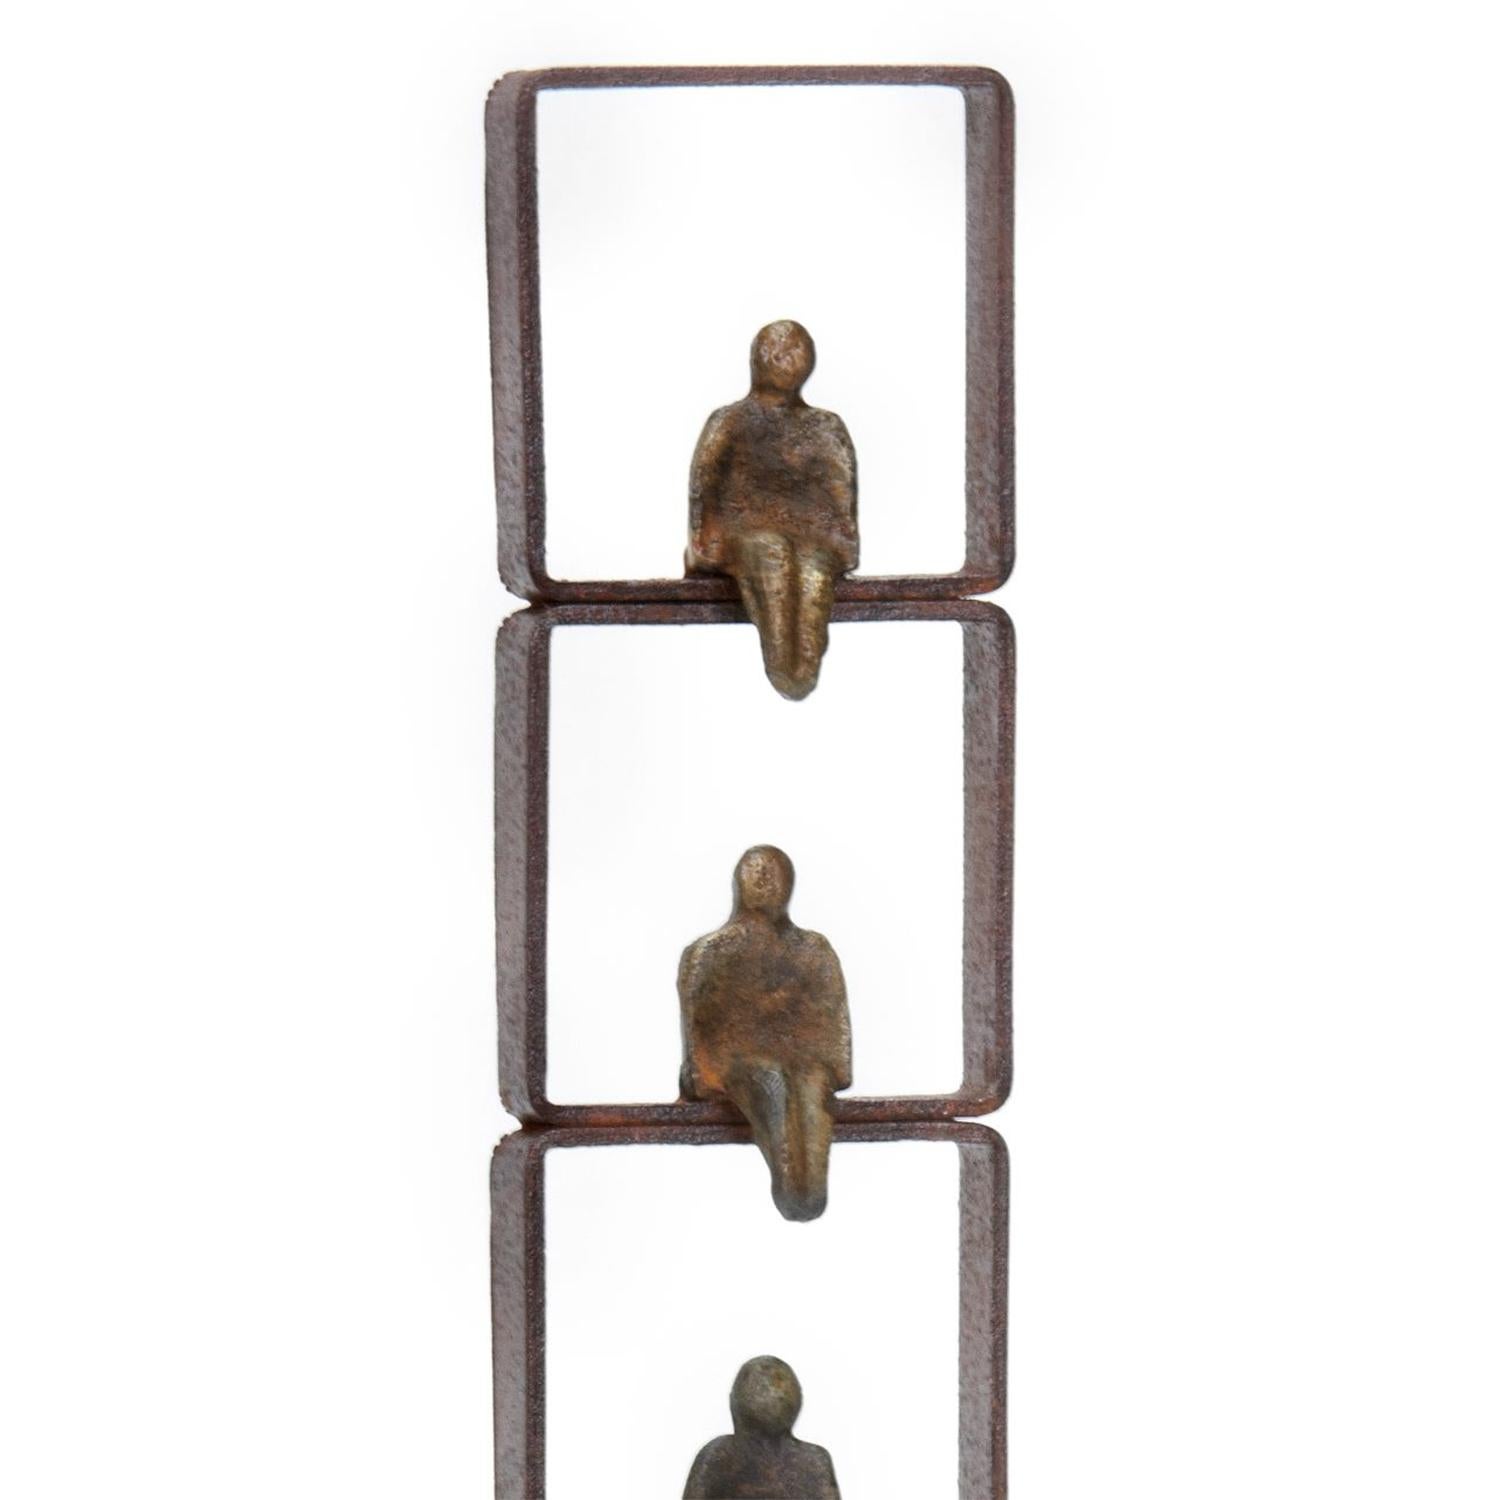 Sculpture Threshold 5 bronze with frame in
iron in oxydised finish and with body sculpture
in solid bronze in brown finish.